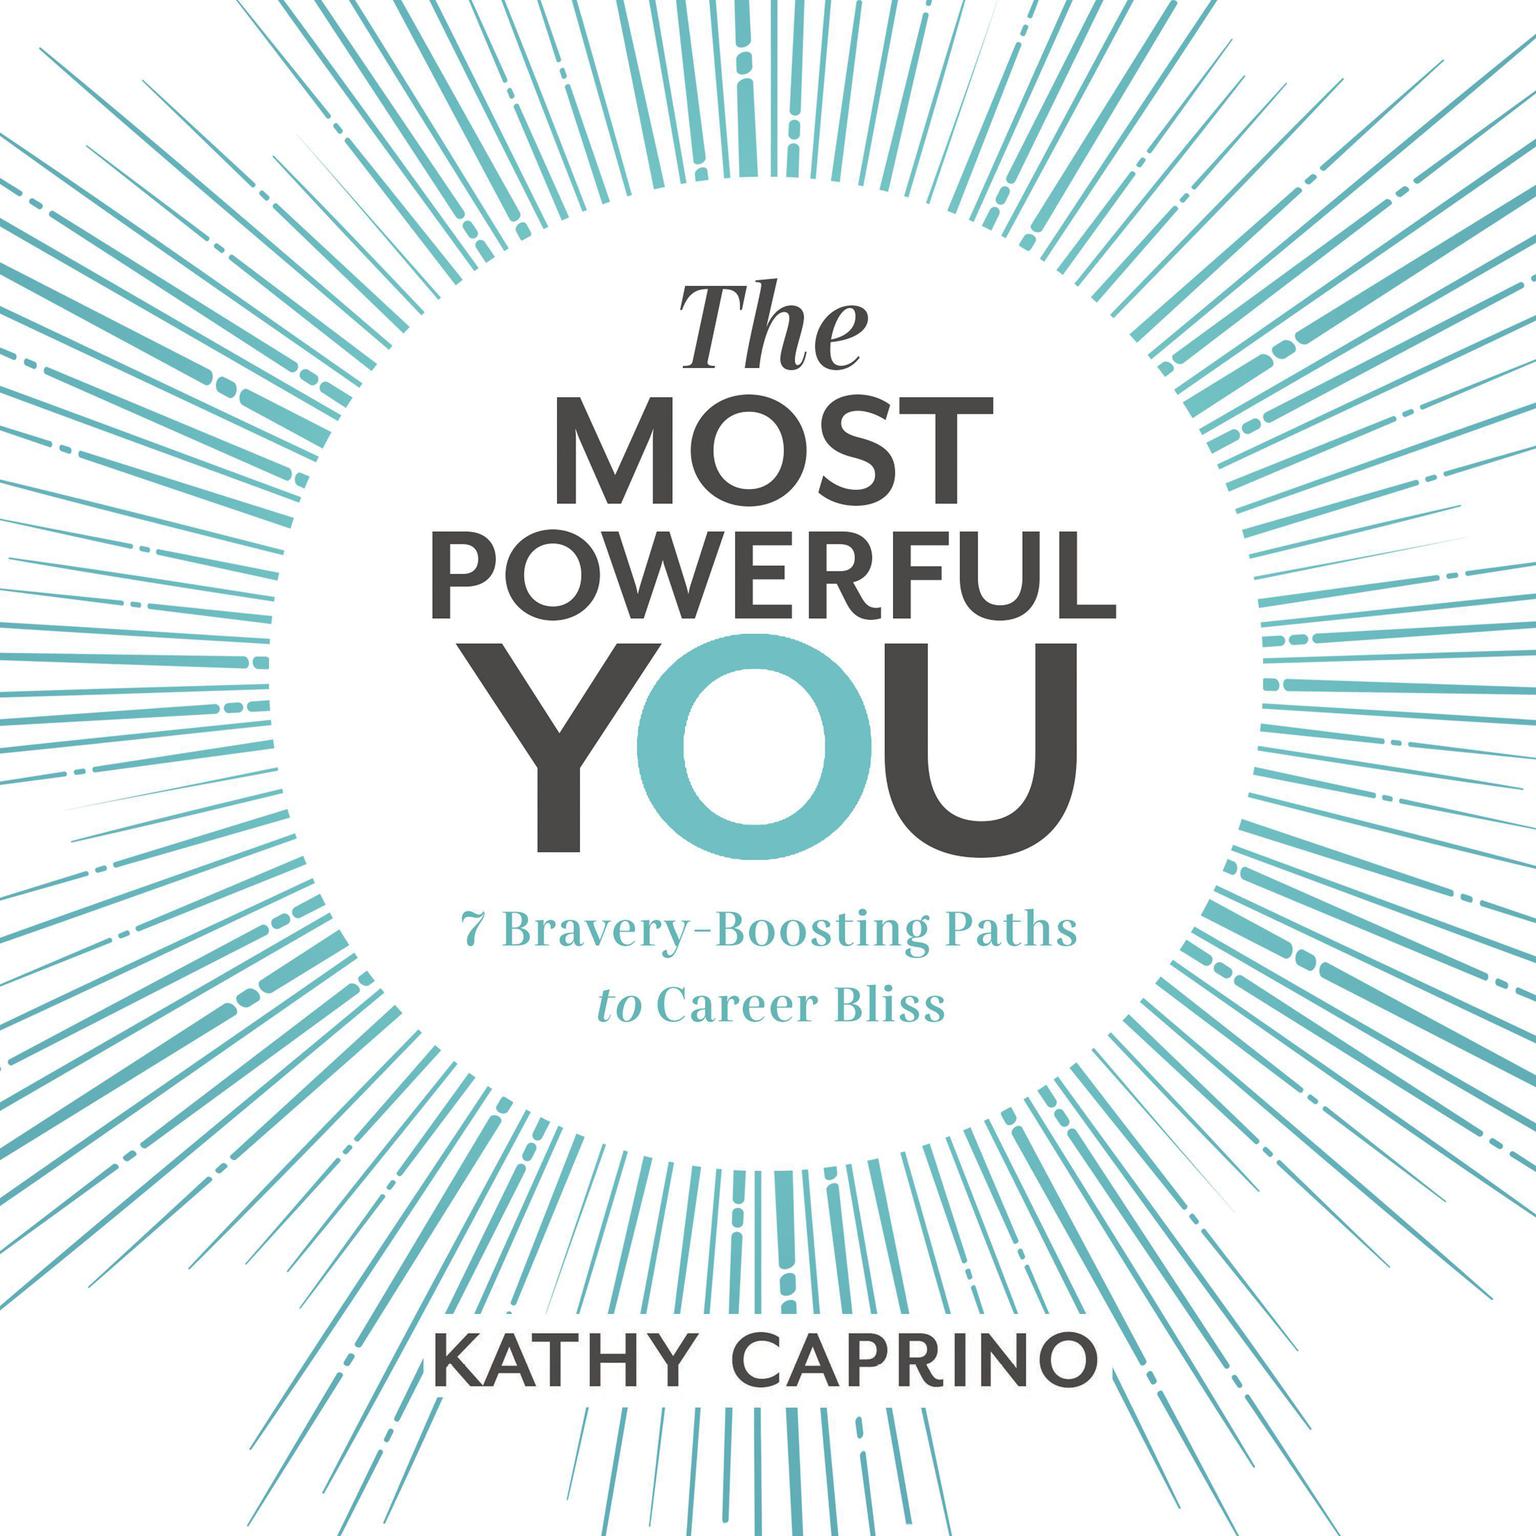 The Most Powerful You: 7 Bravery-Boosting Paths to Career Bliss Audiobook, by Kathy Caprino